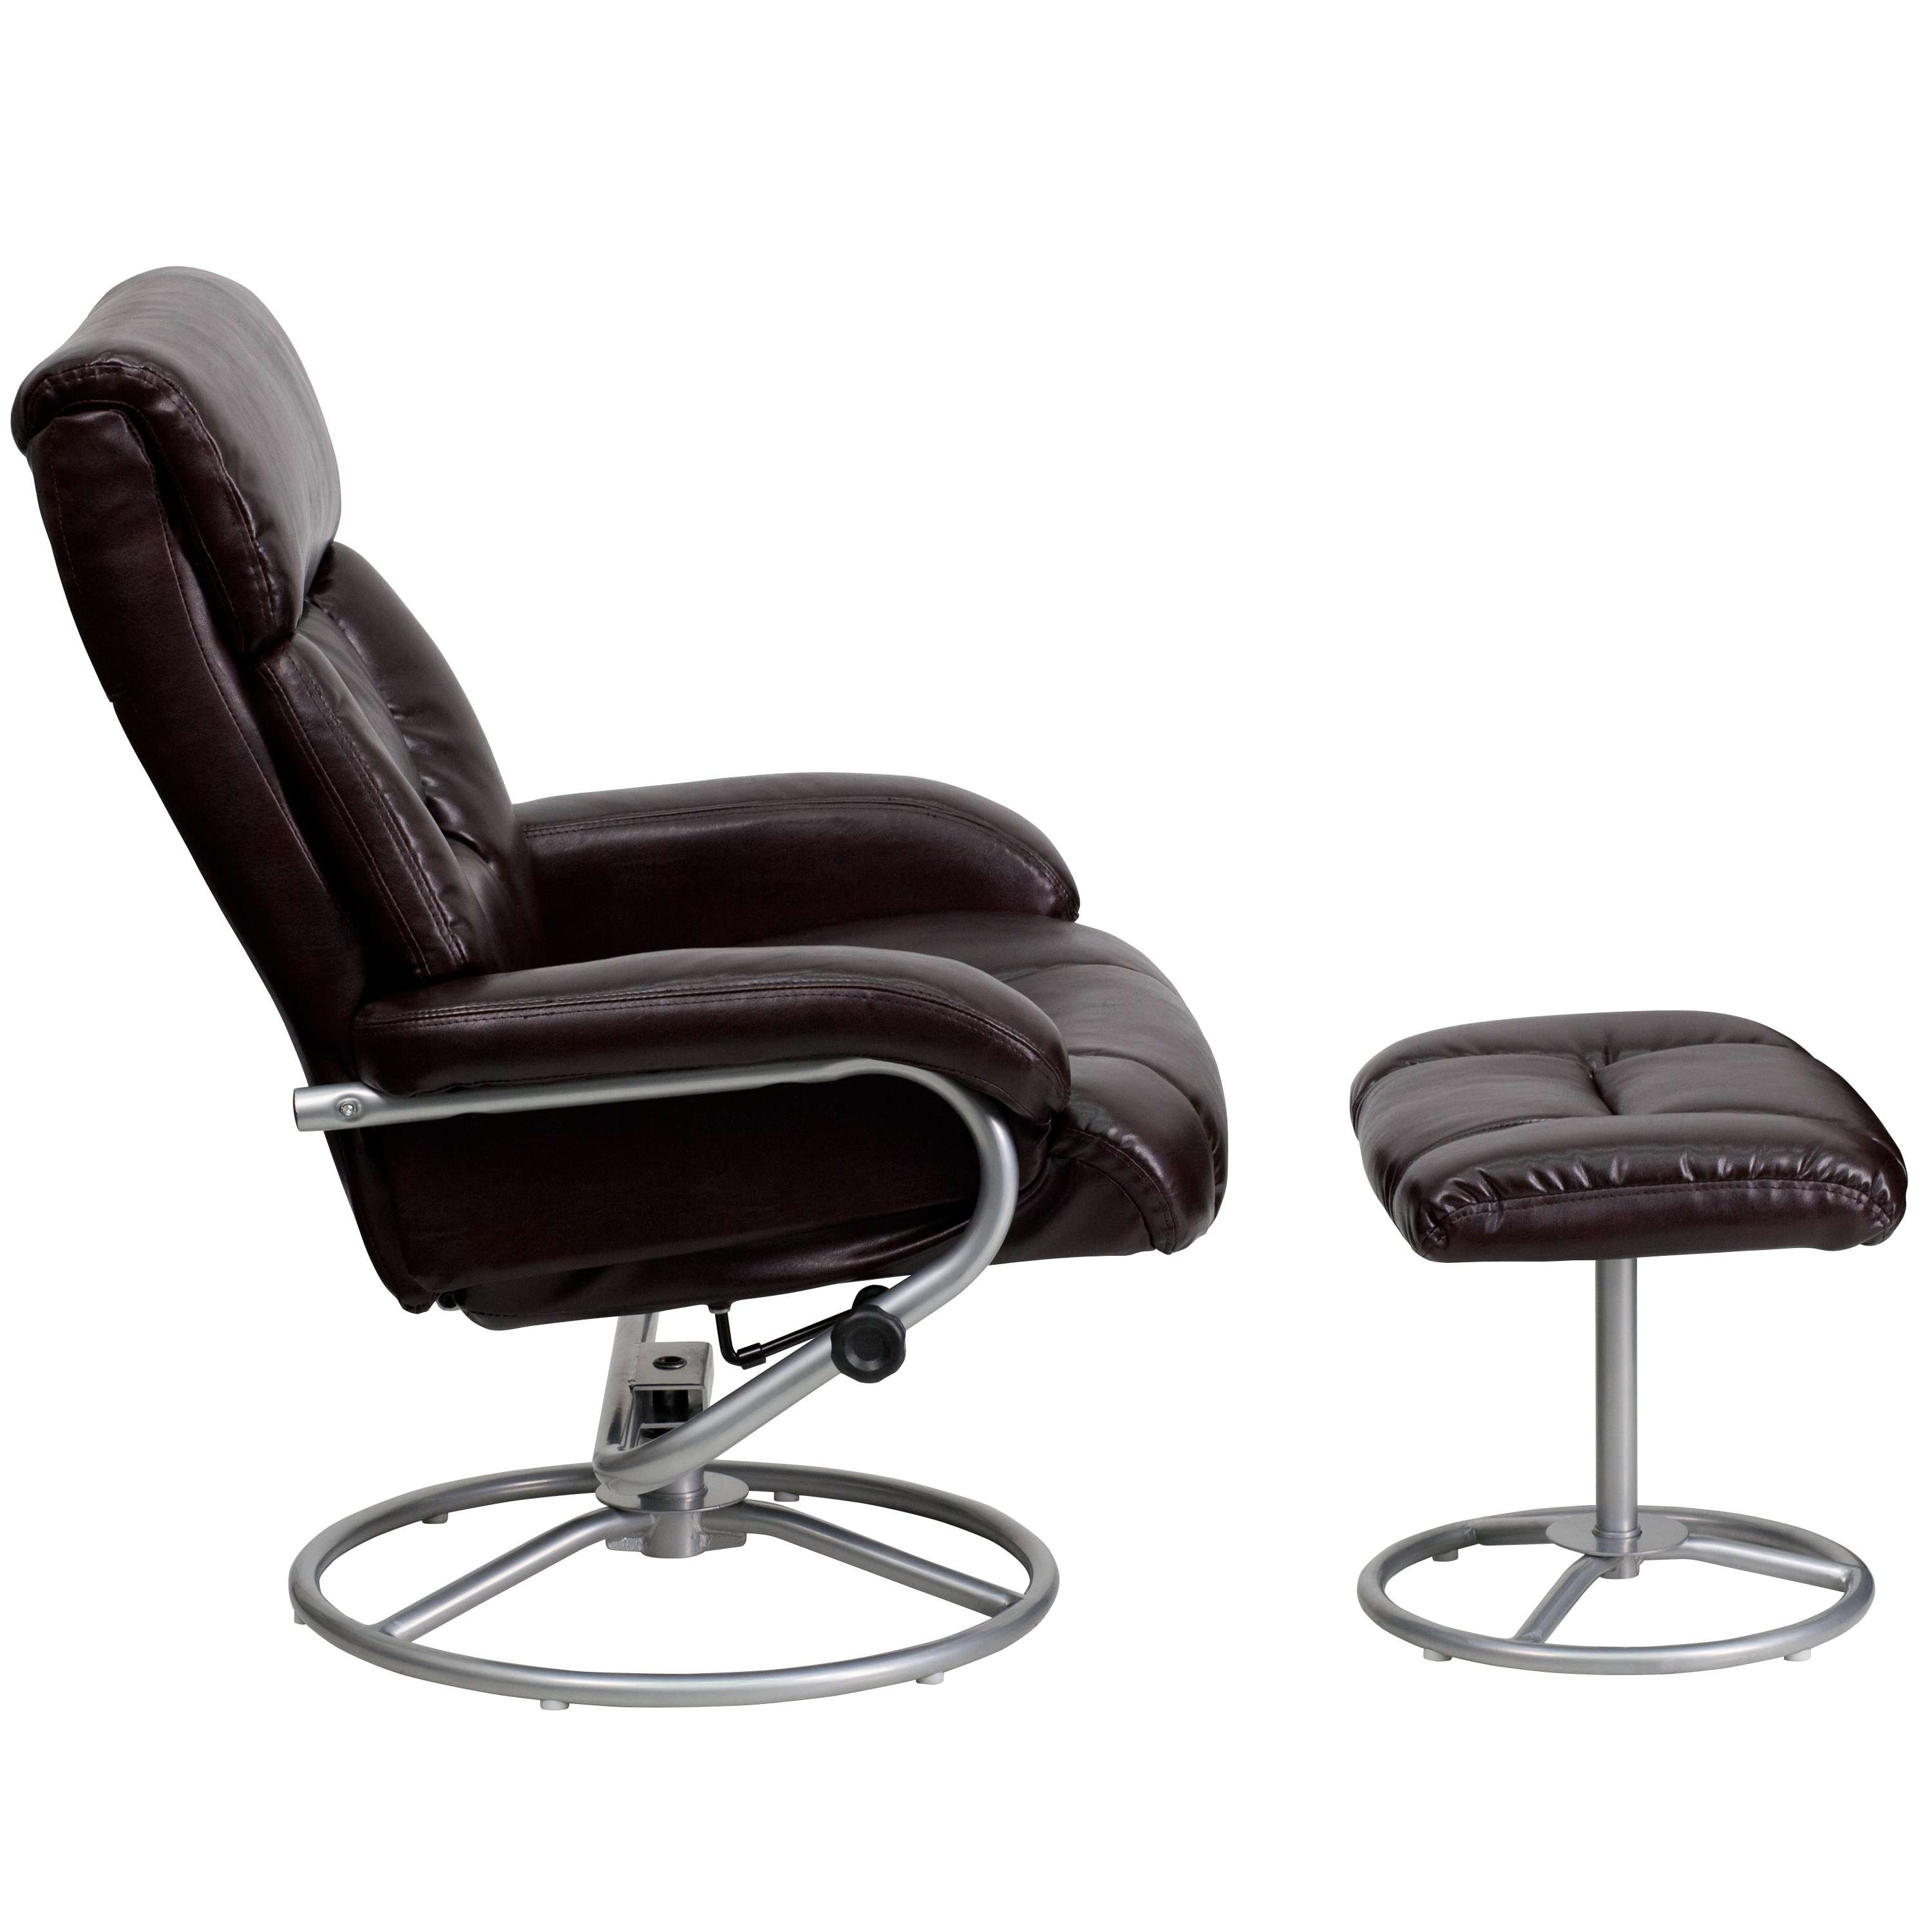 Contemporary leather recliners side view